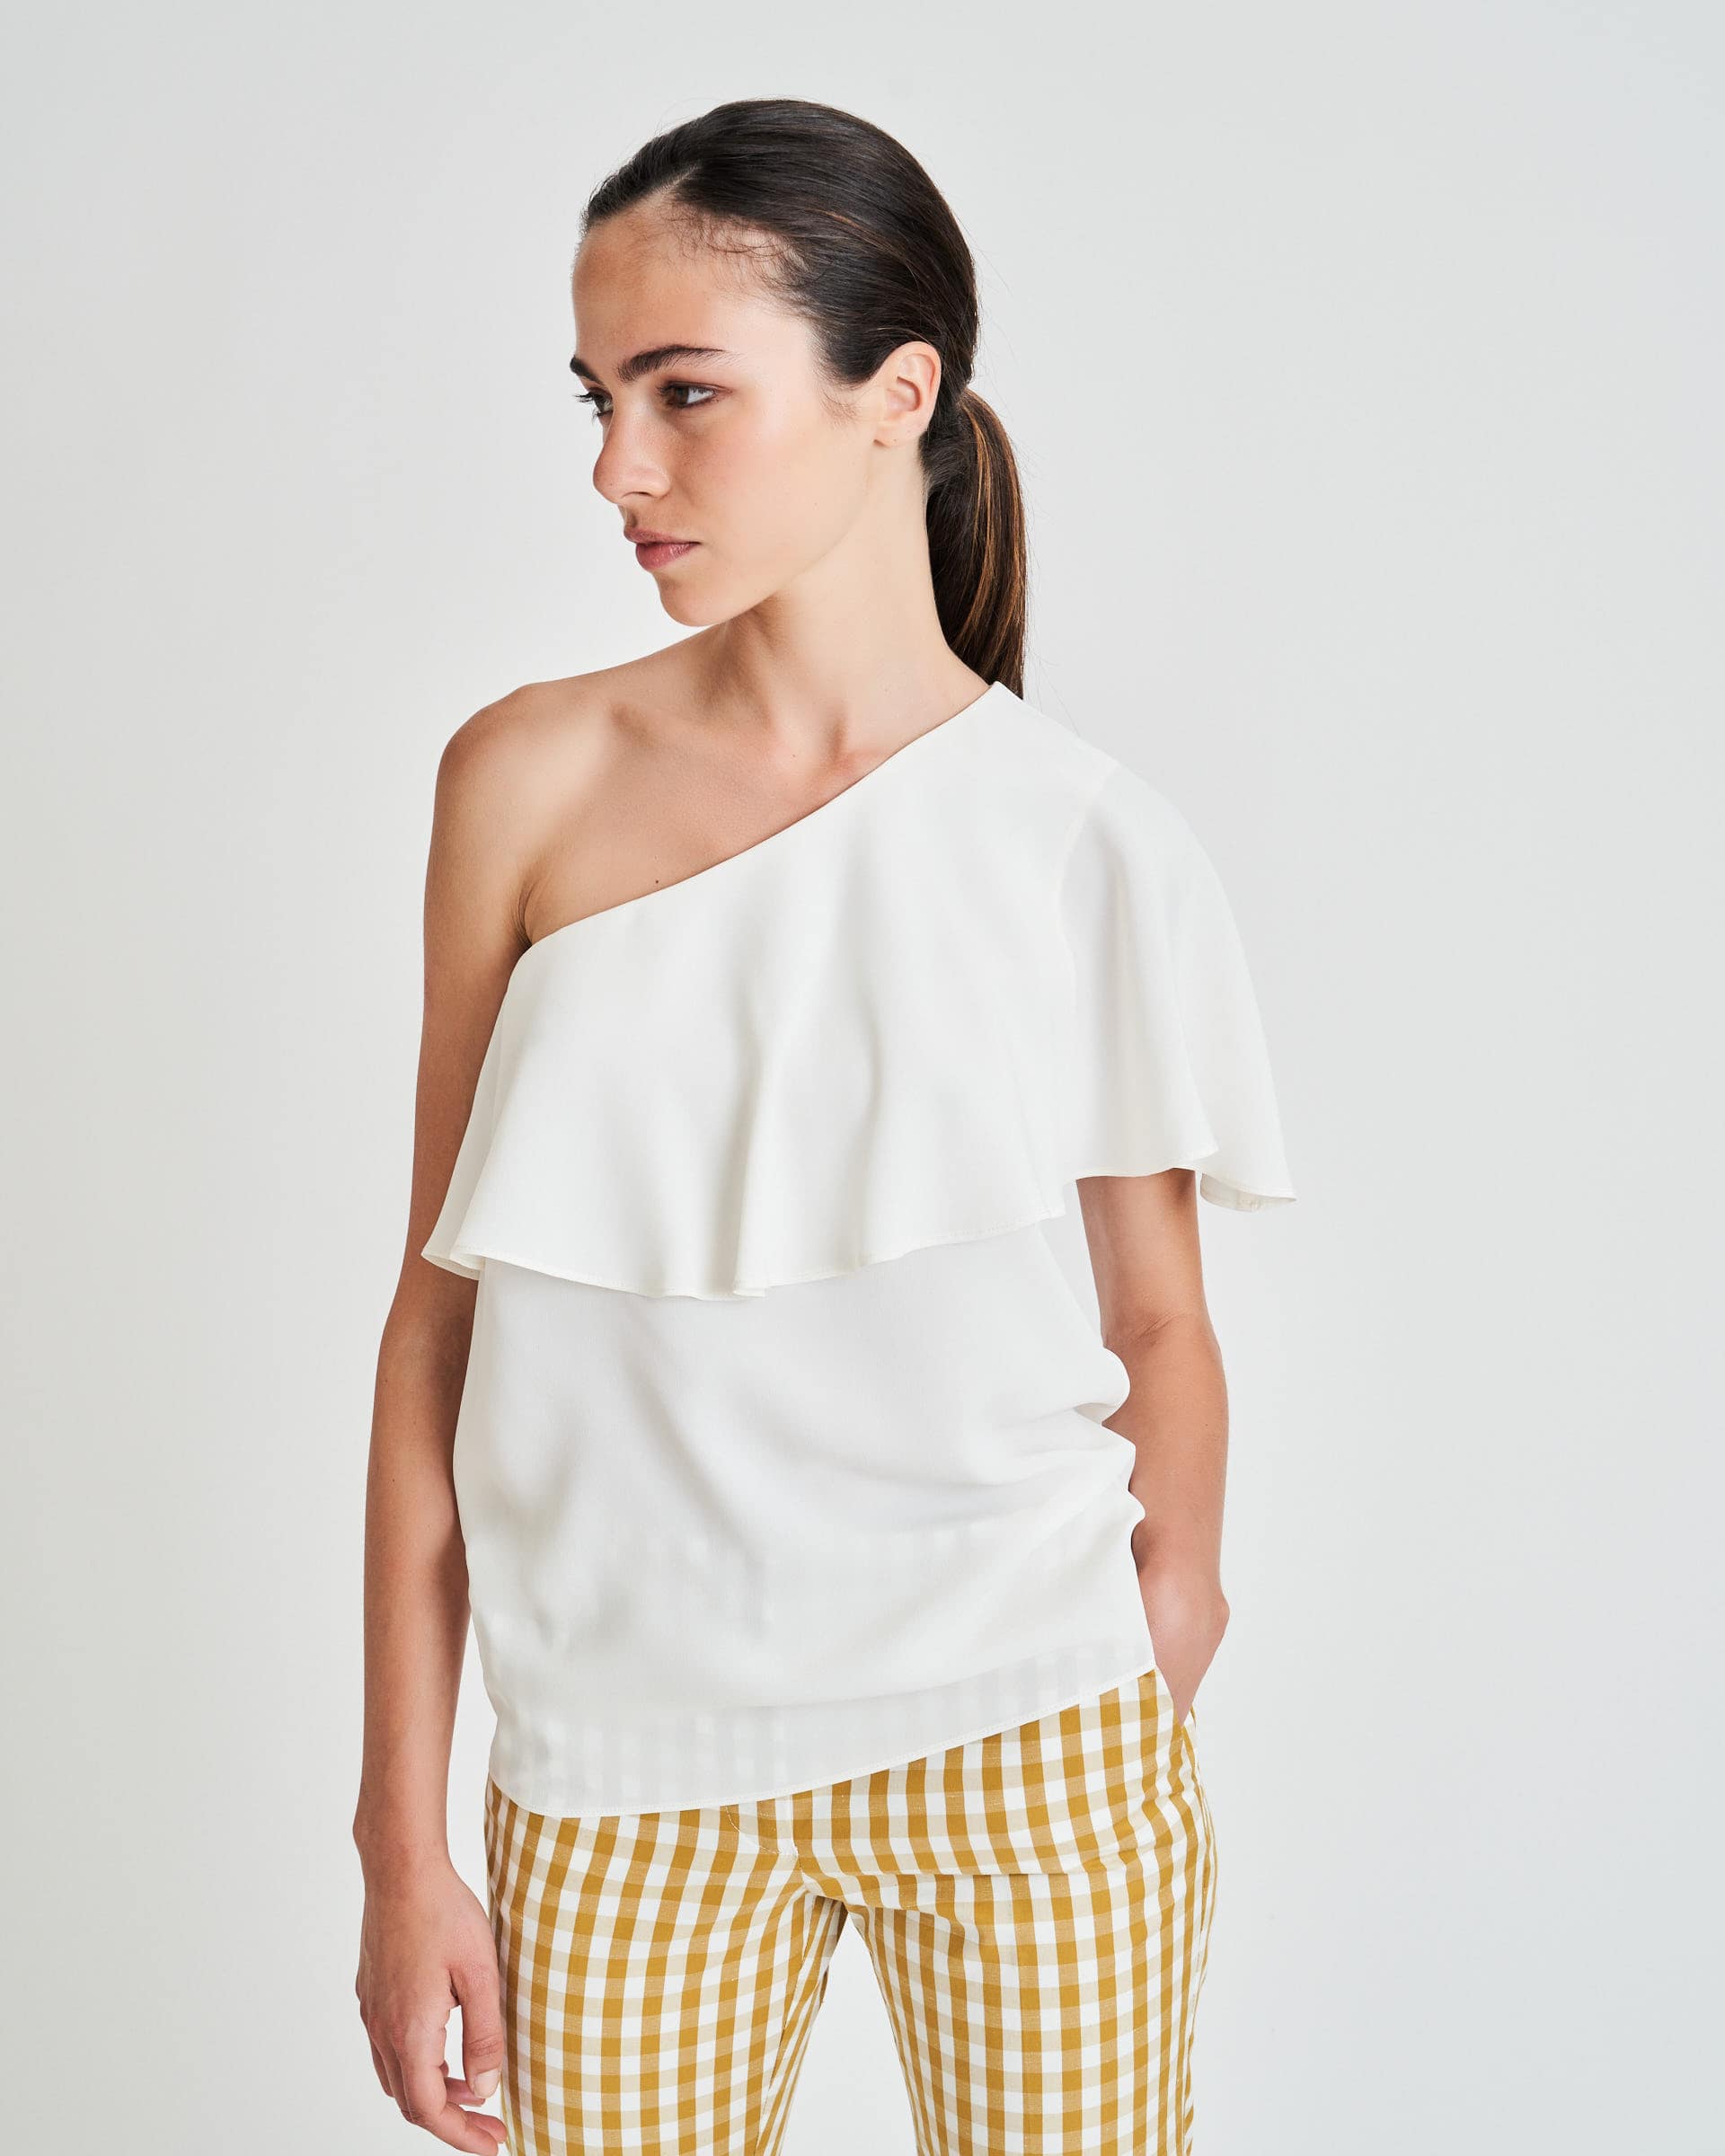 The Market Store | One Shoulder Top With Ruffle